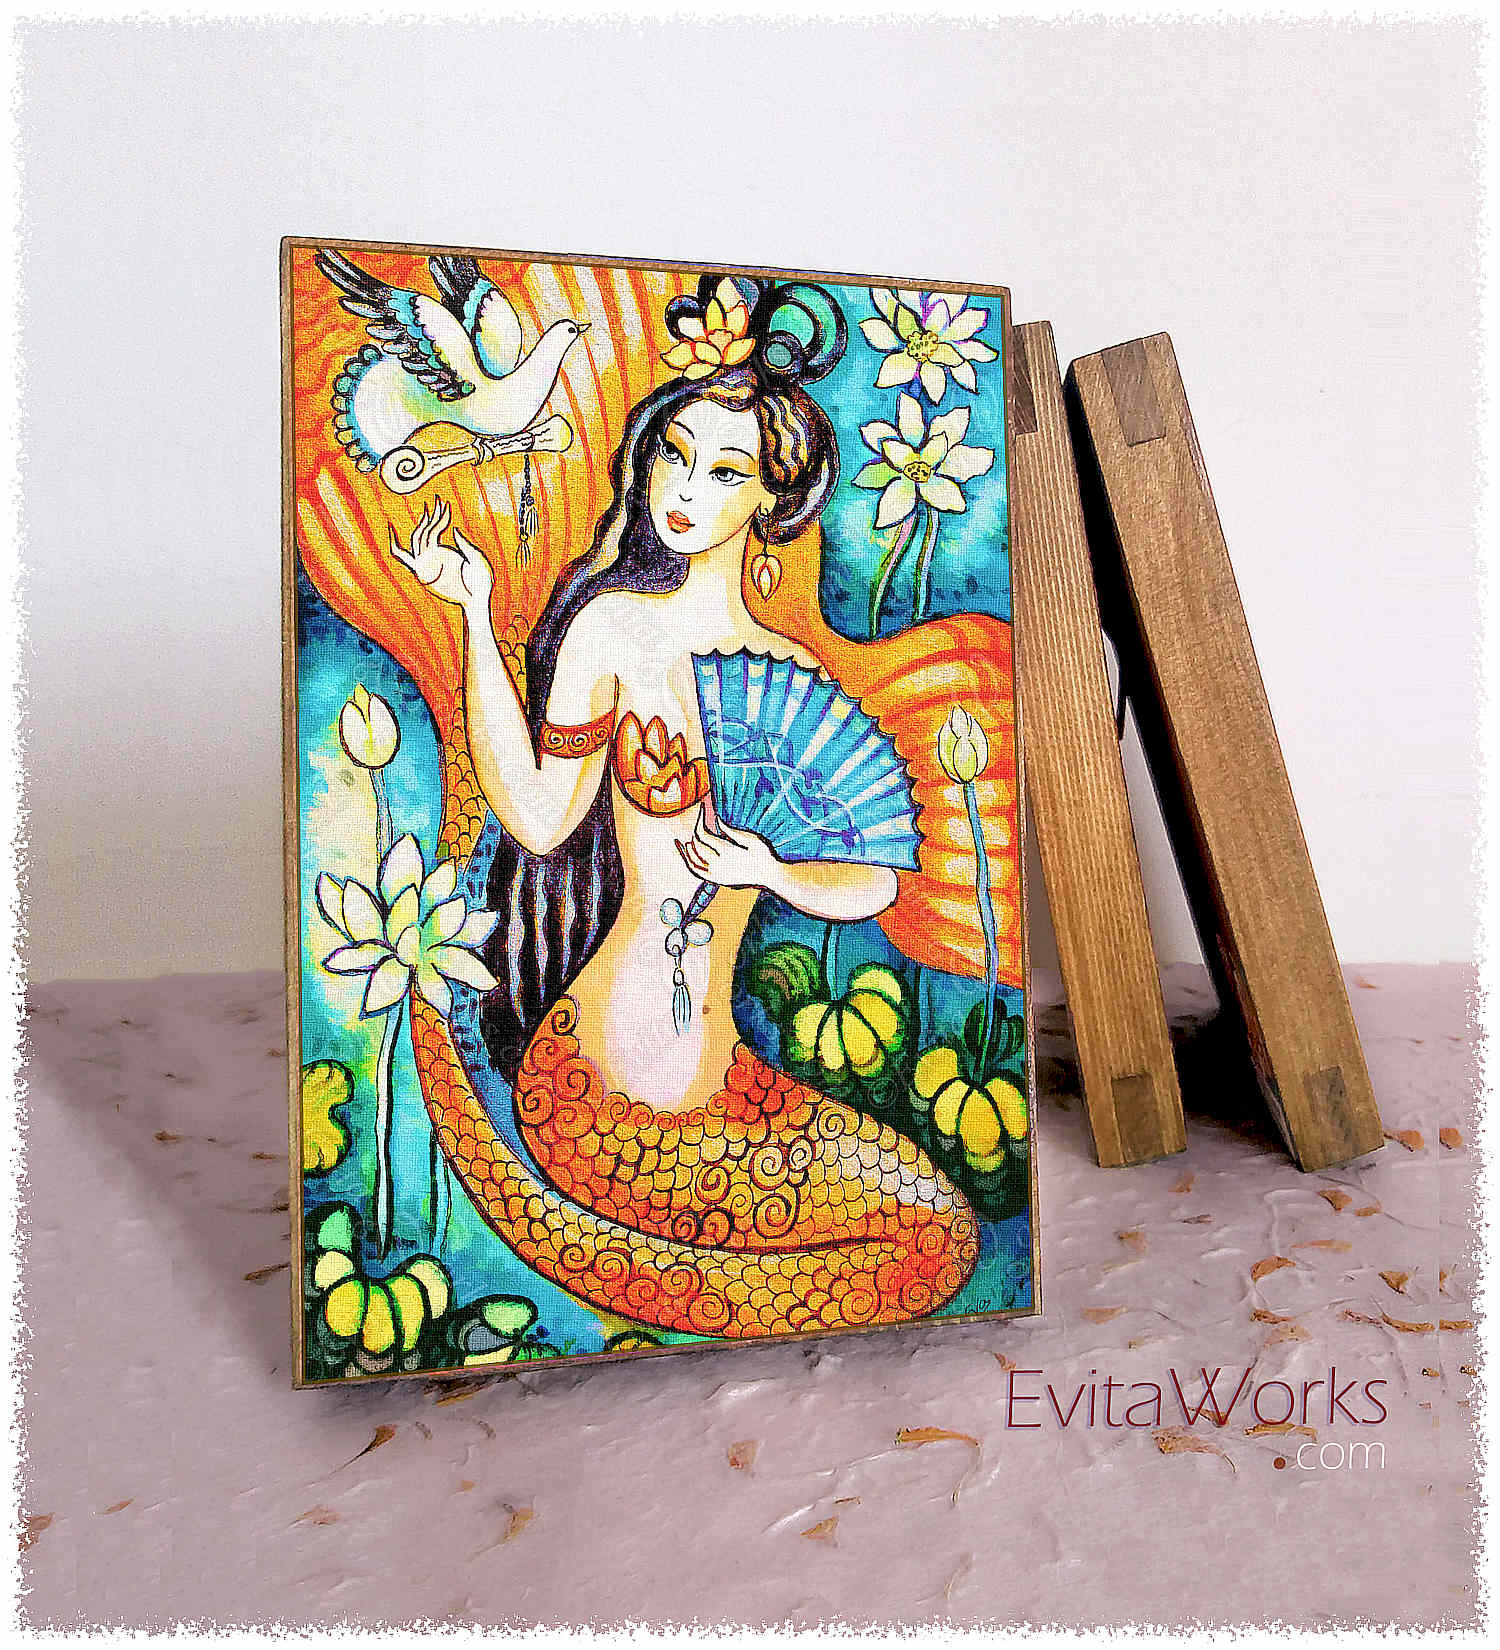 Hit to learn about "A Letter from Far Away, Asian mermaid" on woodblocks